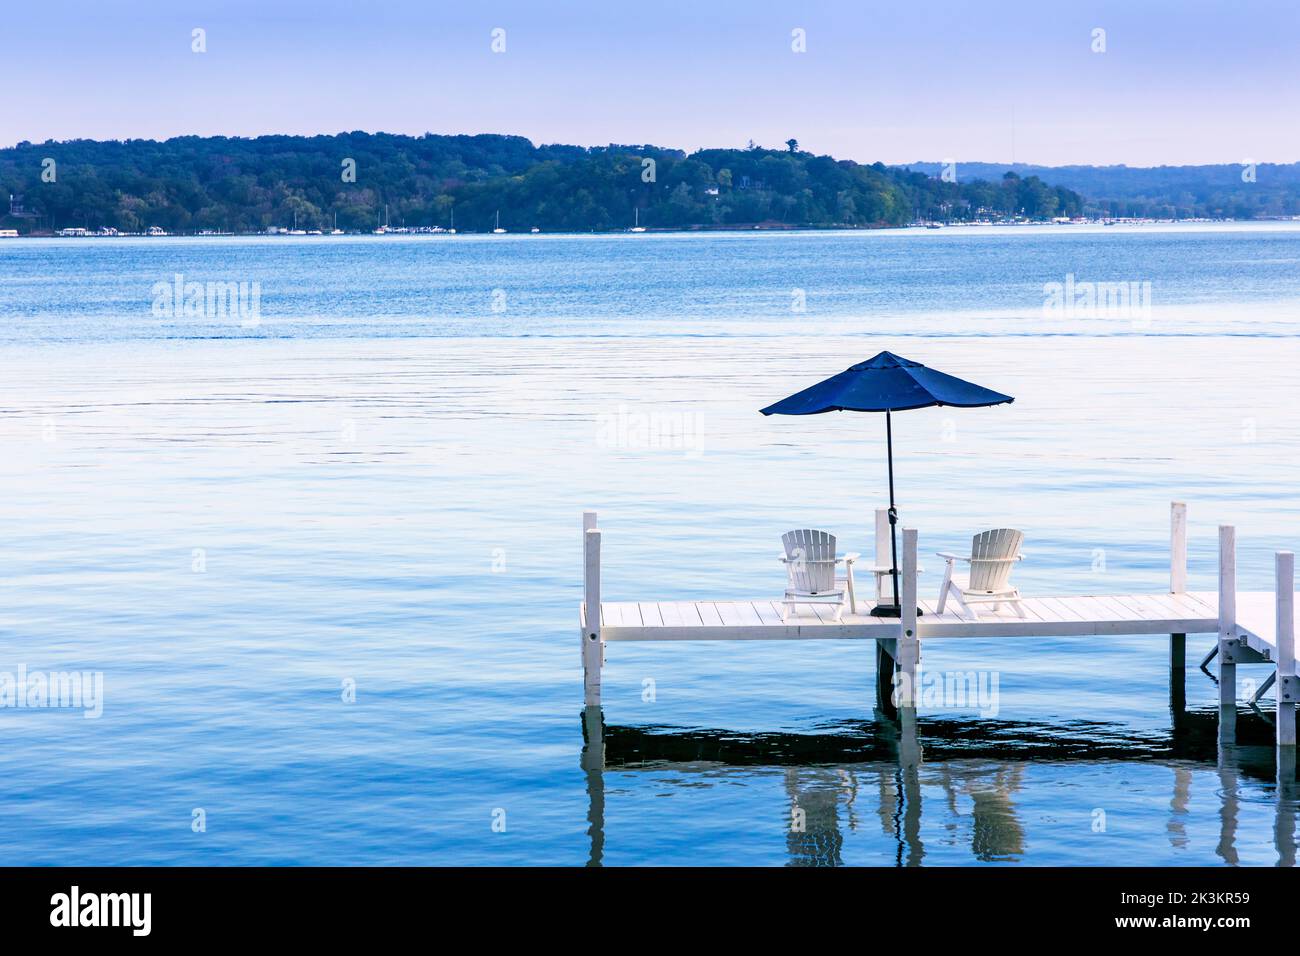 Wooden pier with deck chairs and a shade umbrella overlooking Lake Geneva, near Fontana, Wisconsin, America Stock Photo